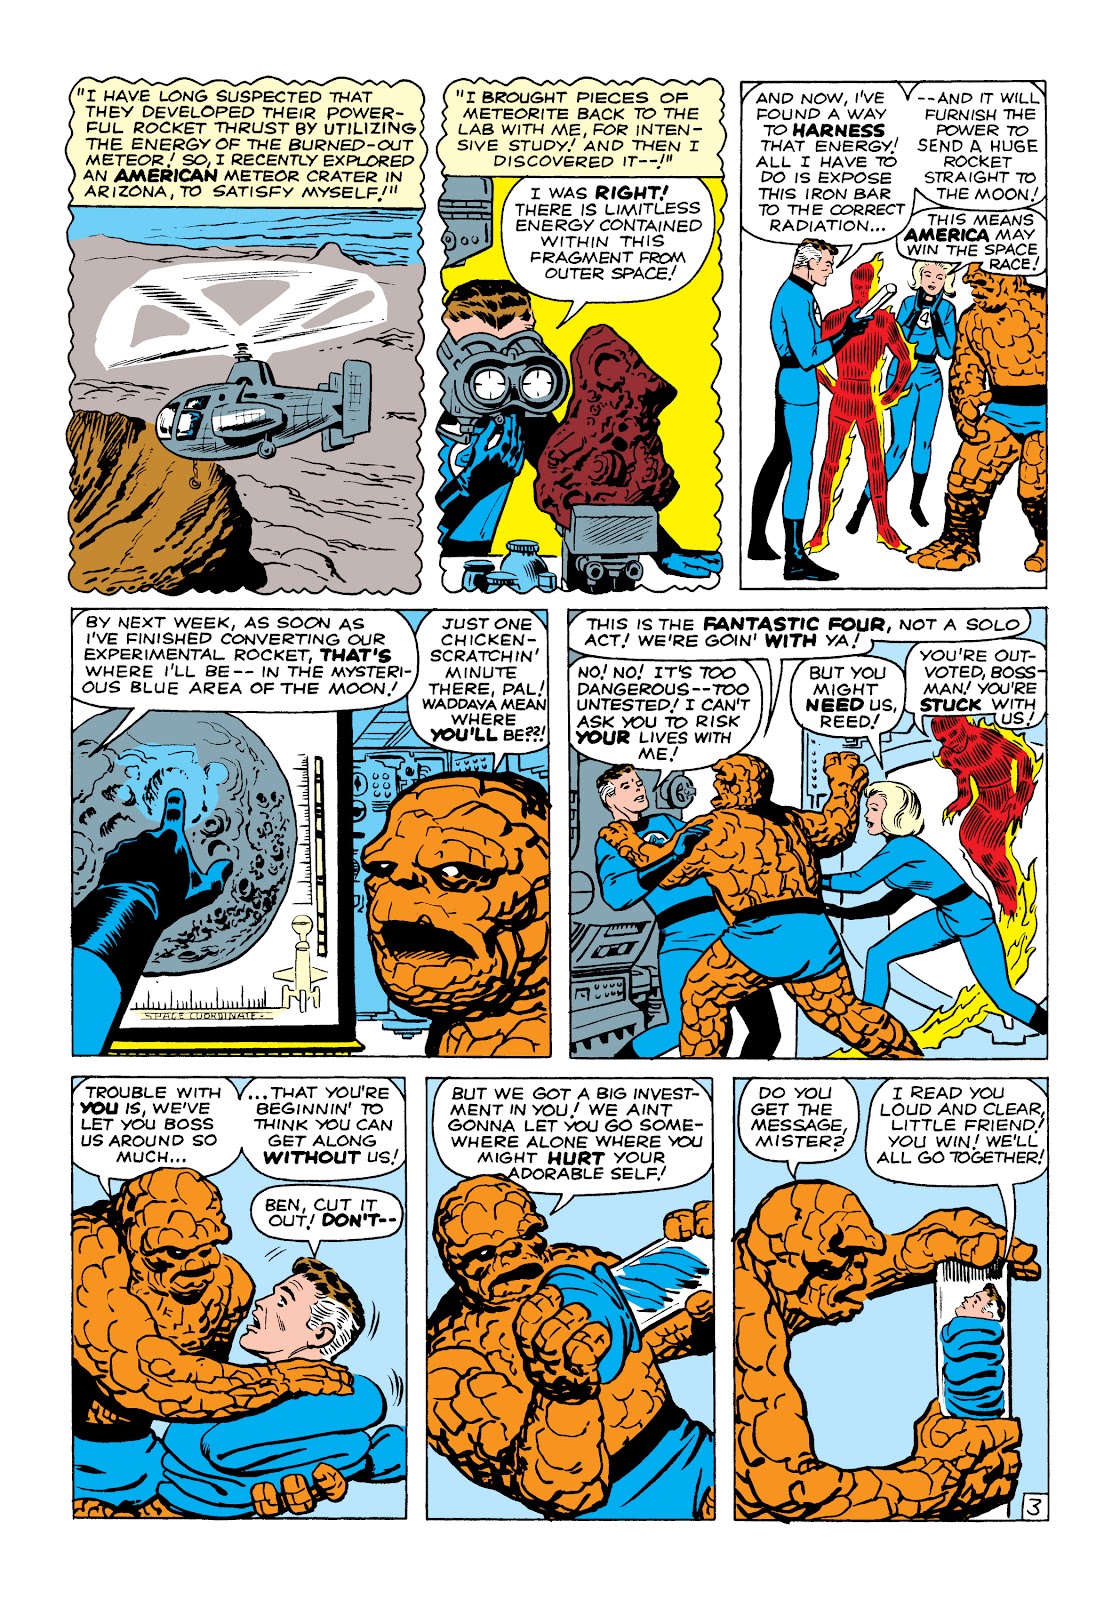 Read online Marvel Masterworks: The Fantastic Four comic - Issue # TPB 2 (Part 1) - 57